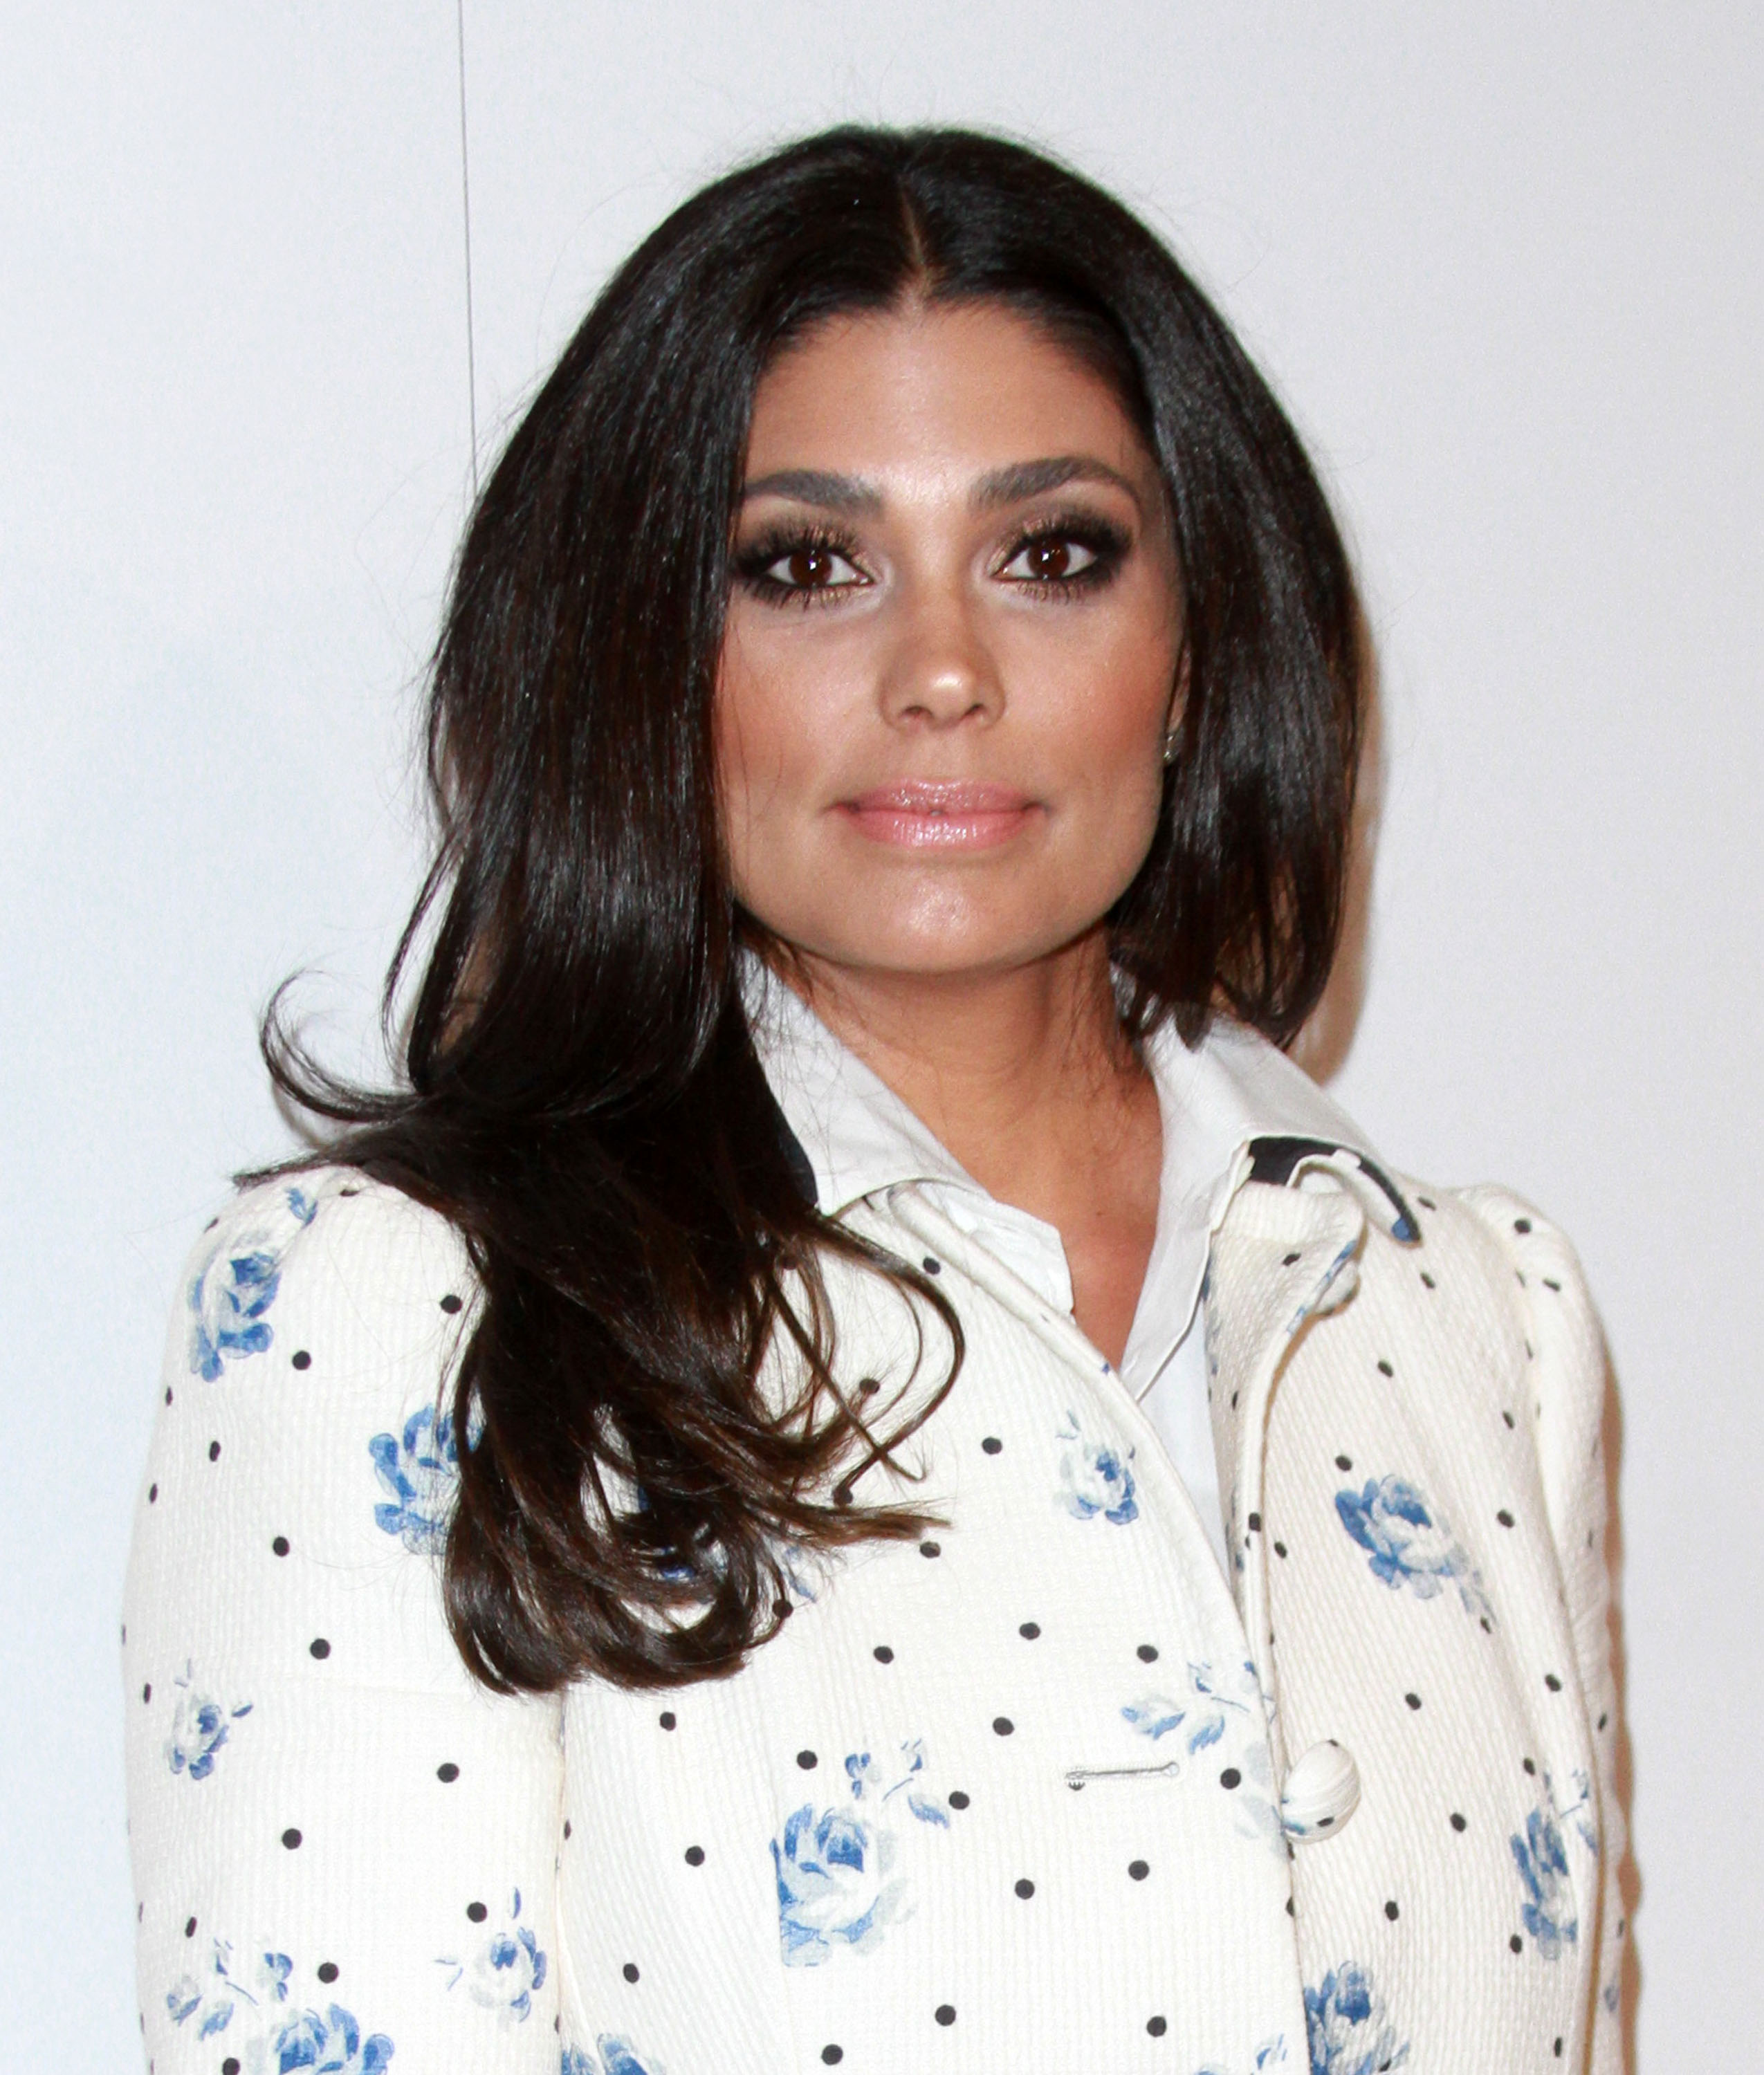 International Women’s Media Foundation 26th Annual Courage in Journalism Awards held at the Beverly Wilshire Hotel - Arrivals Featuring: Rachel Roy Where: Los Angeles, California, United States When: 27 Oct 2015 Credit: Adriana M. Barraza/WENN.com